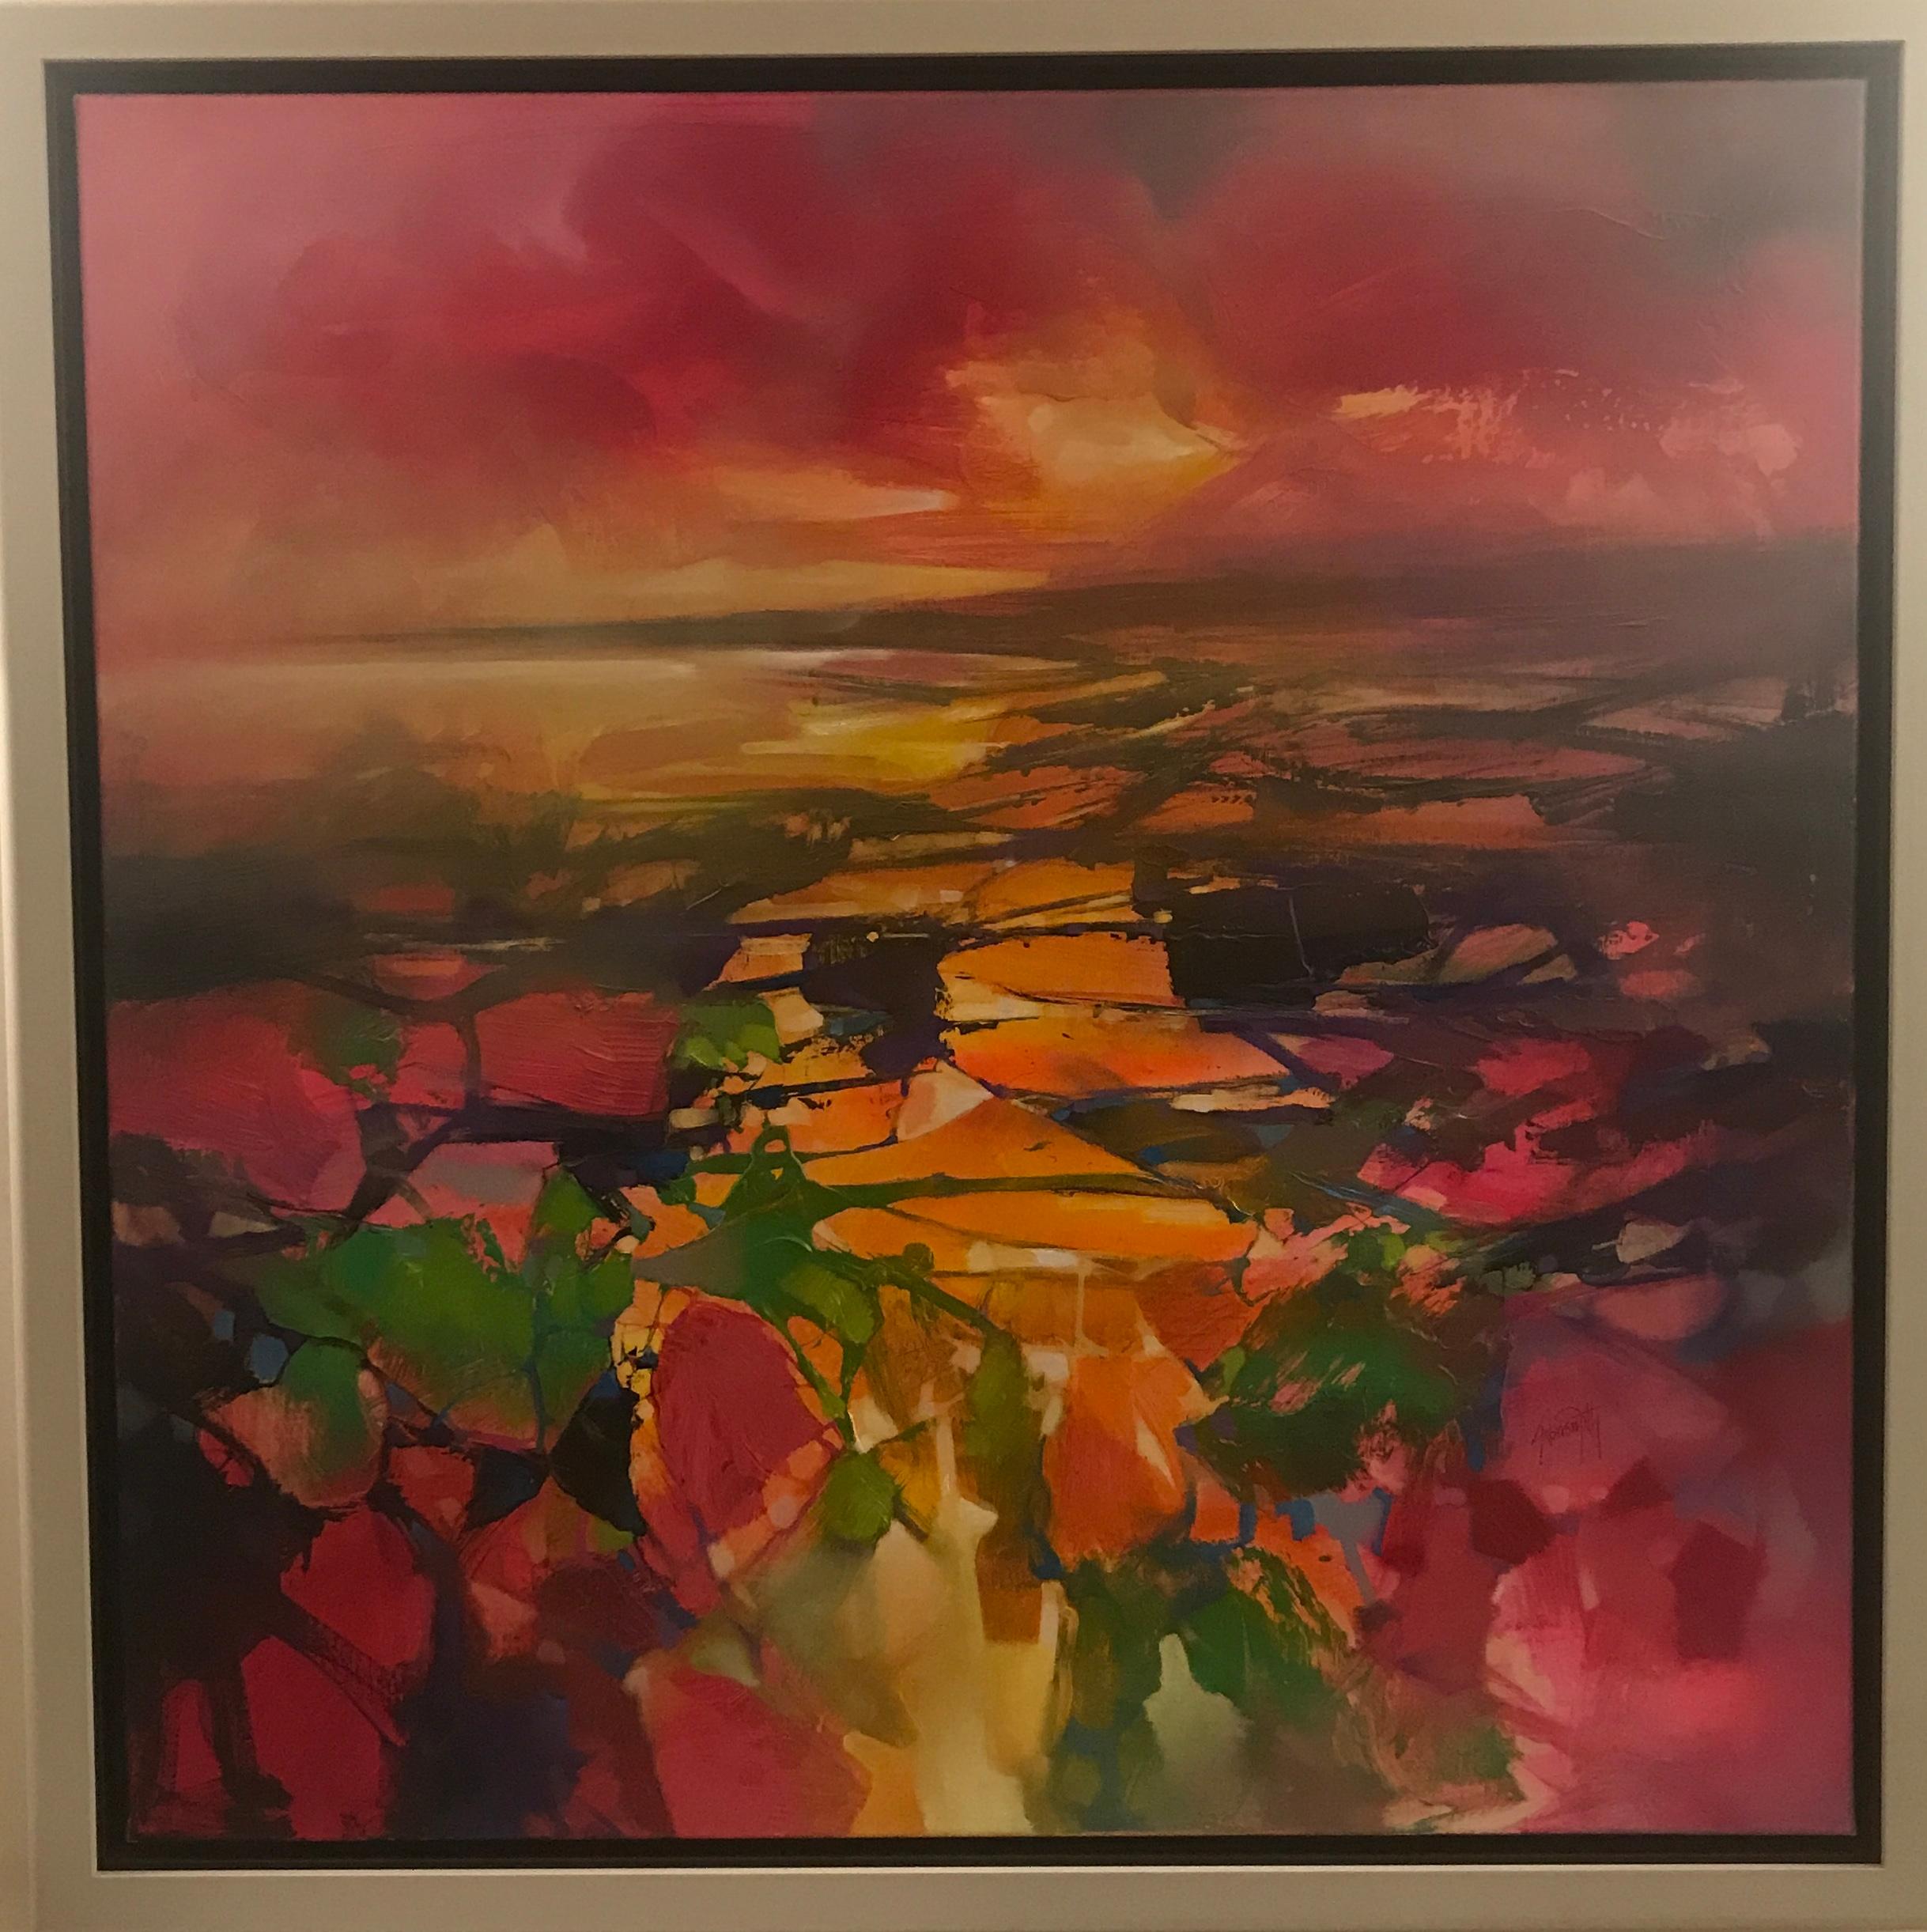 where is the artist of the painting above originally from